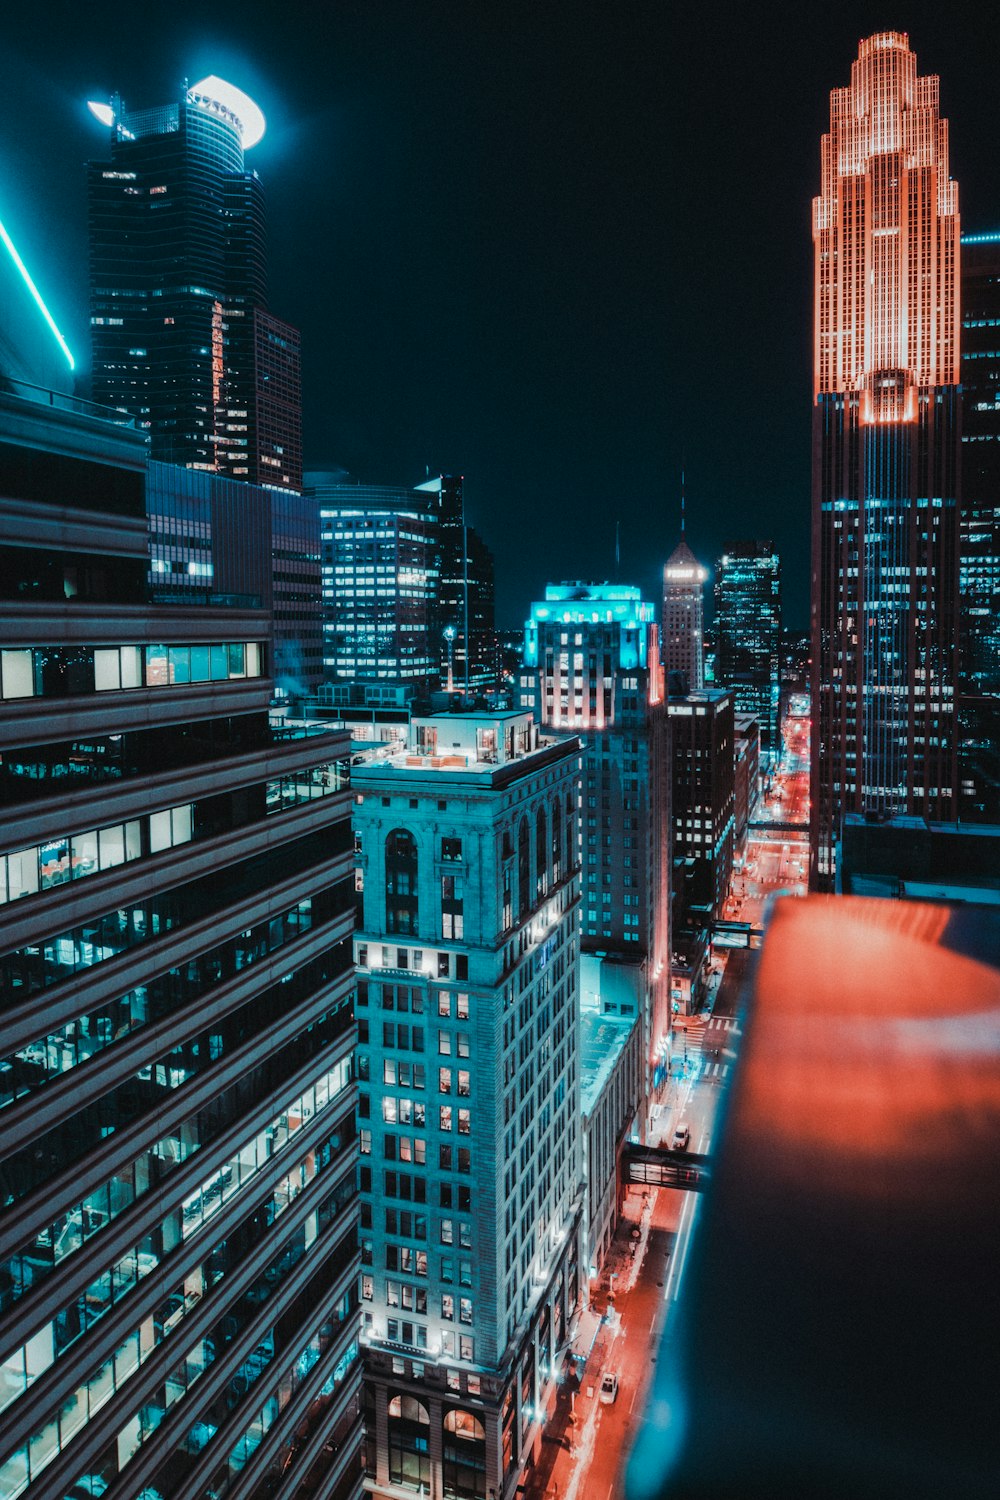 City Night View Pictures Download Free Images On Unsplash